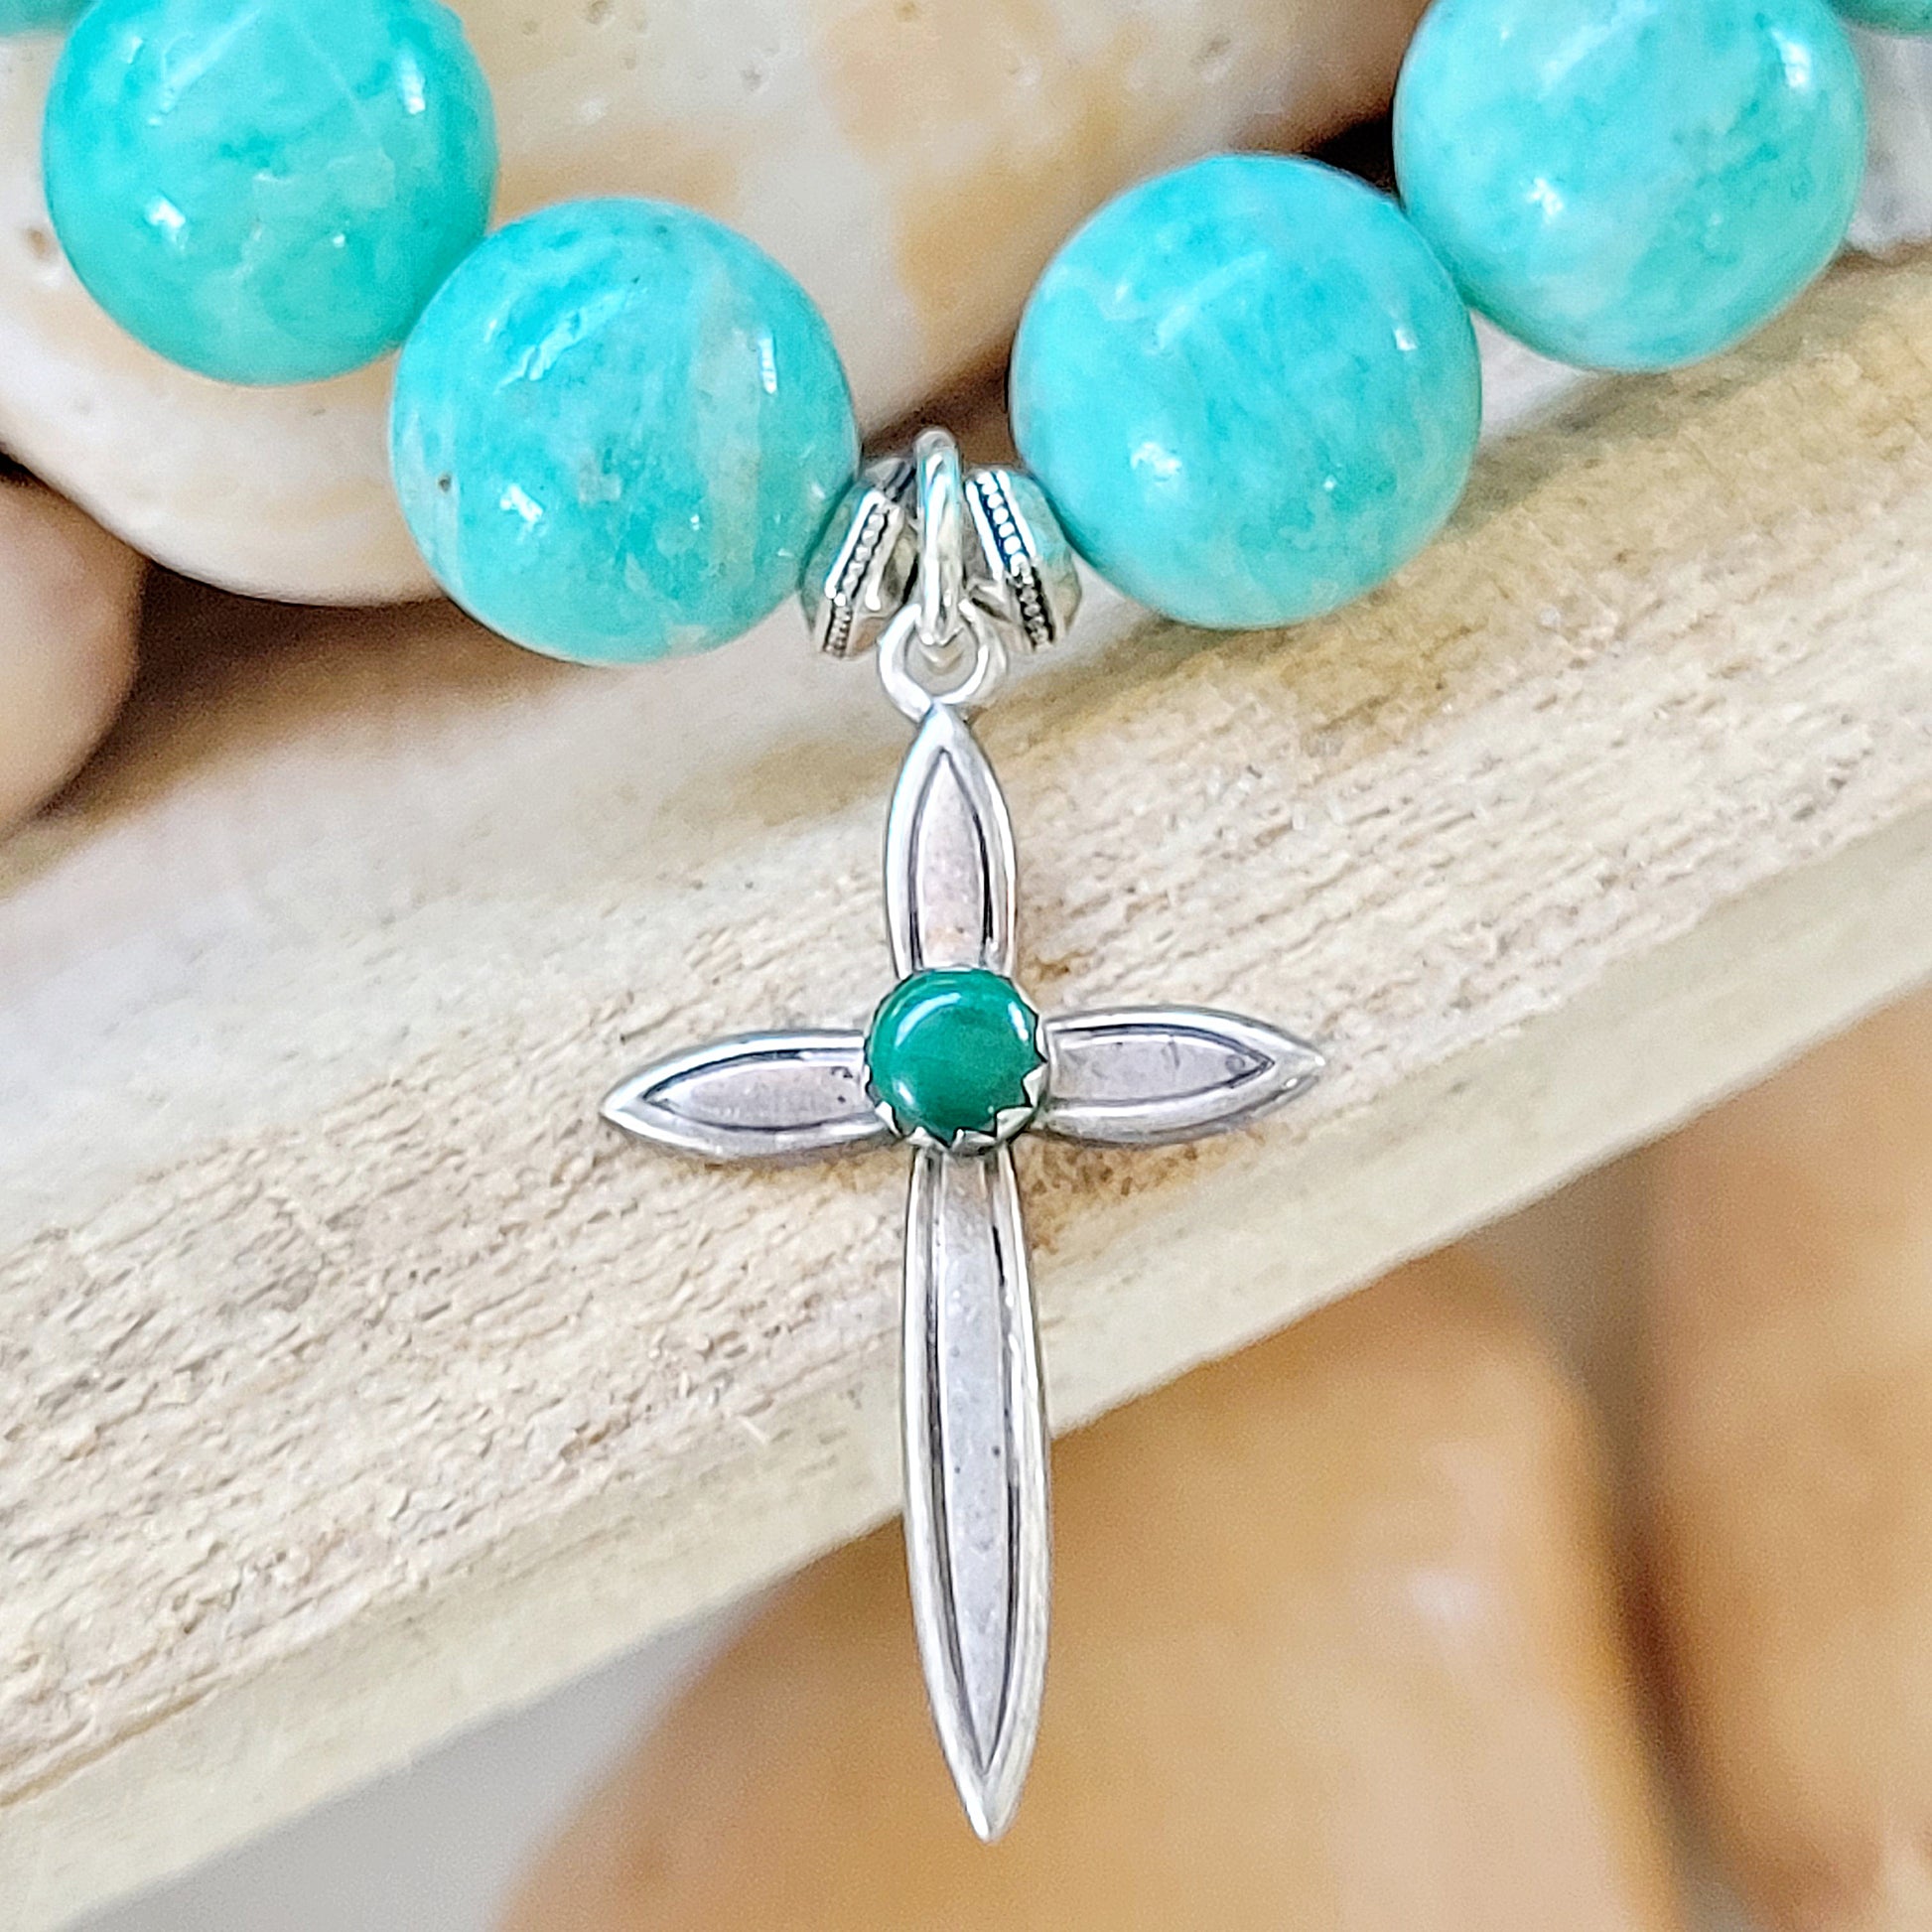 Brazilian Amazonite 12mm Beaded Bracelet w/ Sterling Silver Cross and Jade Accent - Afterlife Jewelry Designs